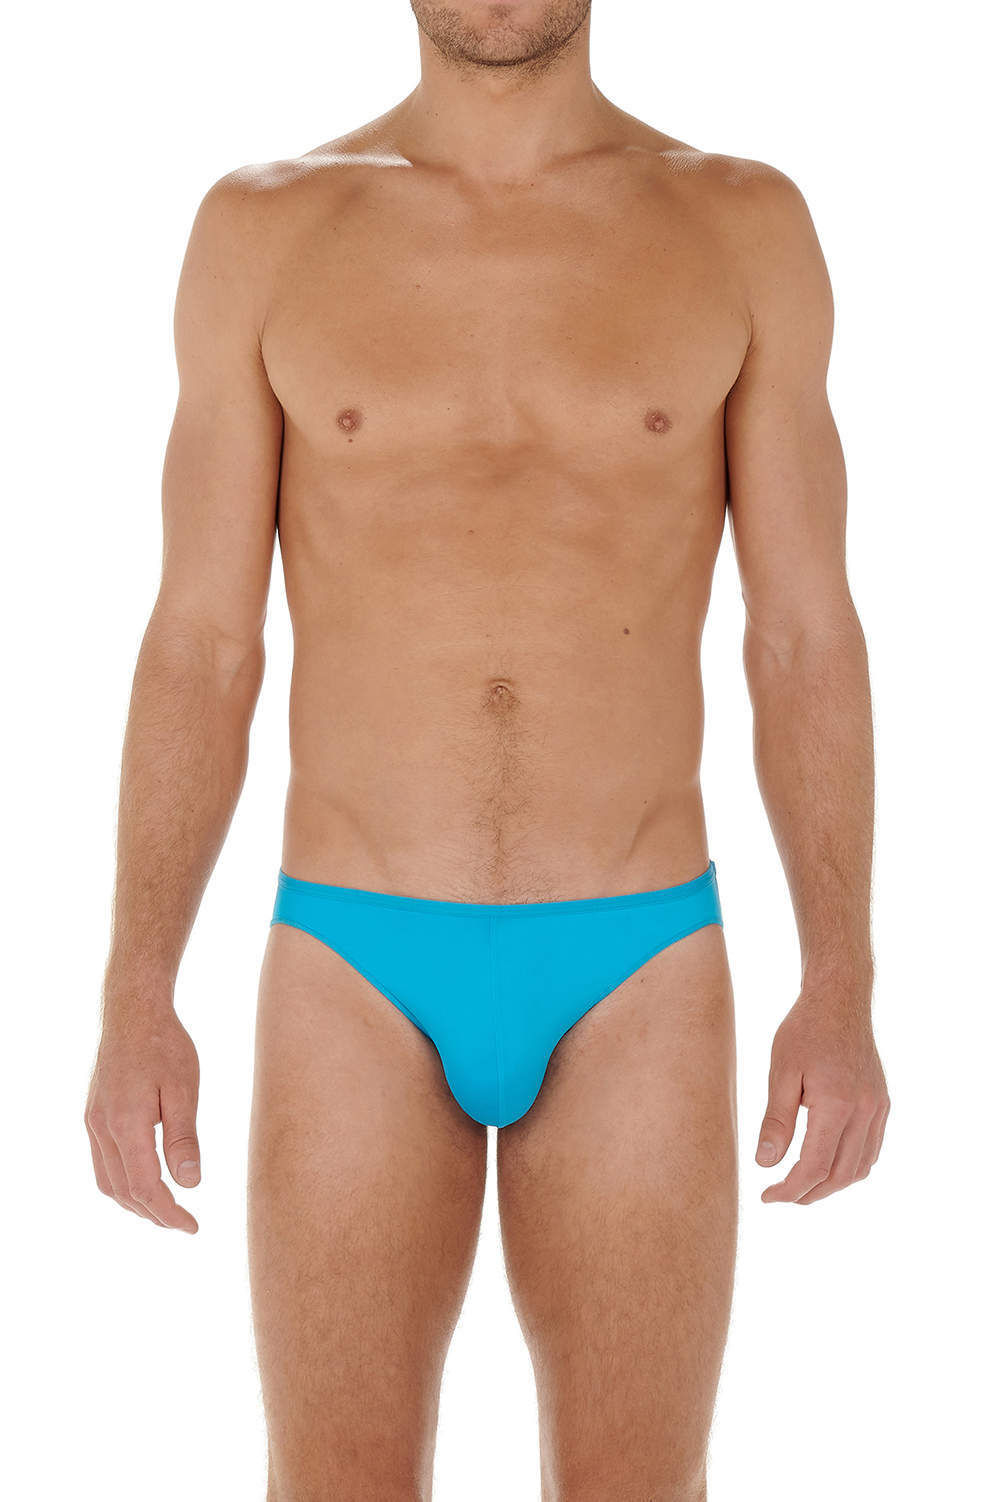 NEW HOM colours in Plume and ultra soft Tencel - PLUS up to 50% off end of  line HOM sale - Dead Good Undies